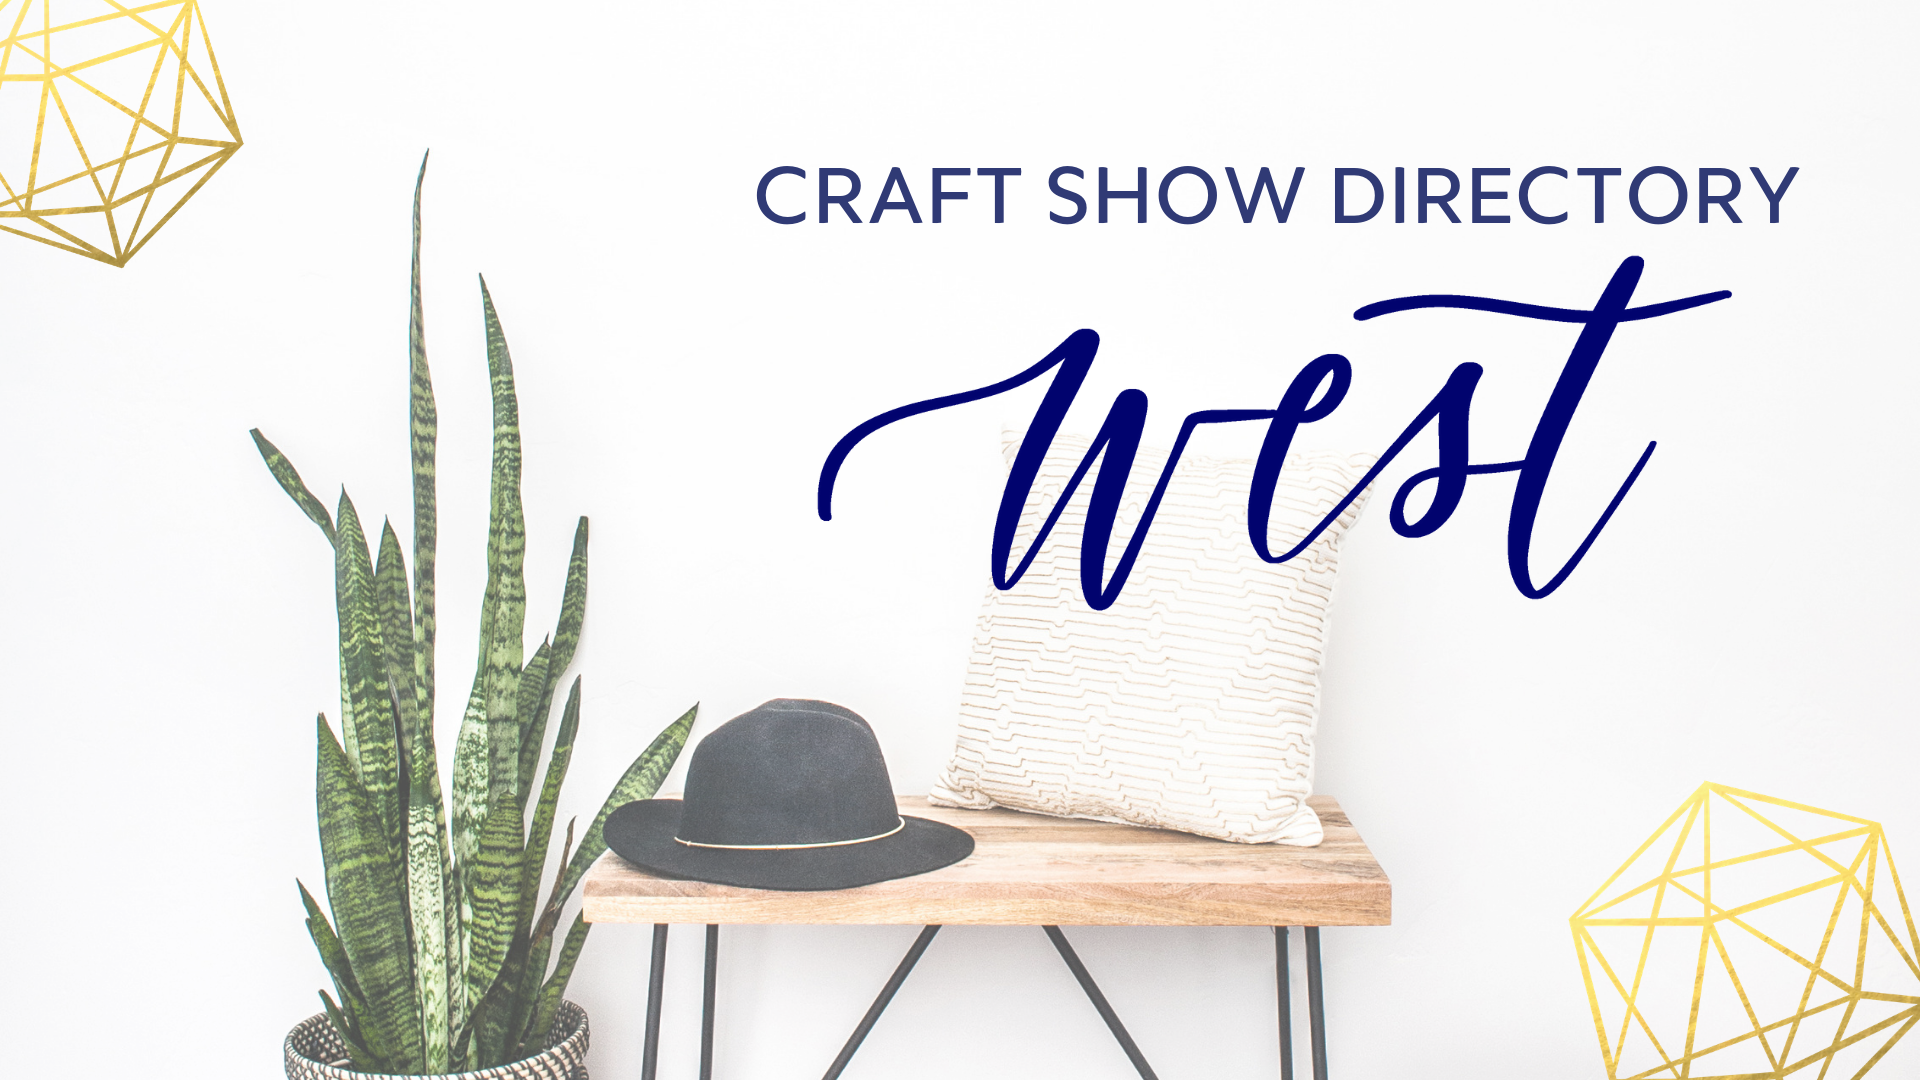 Craft Show Directory West